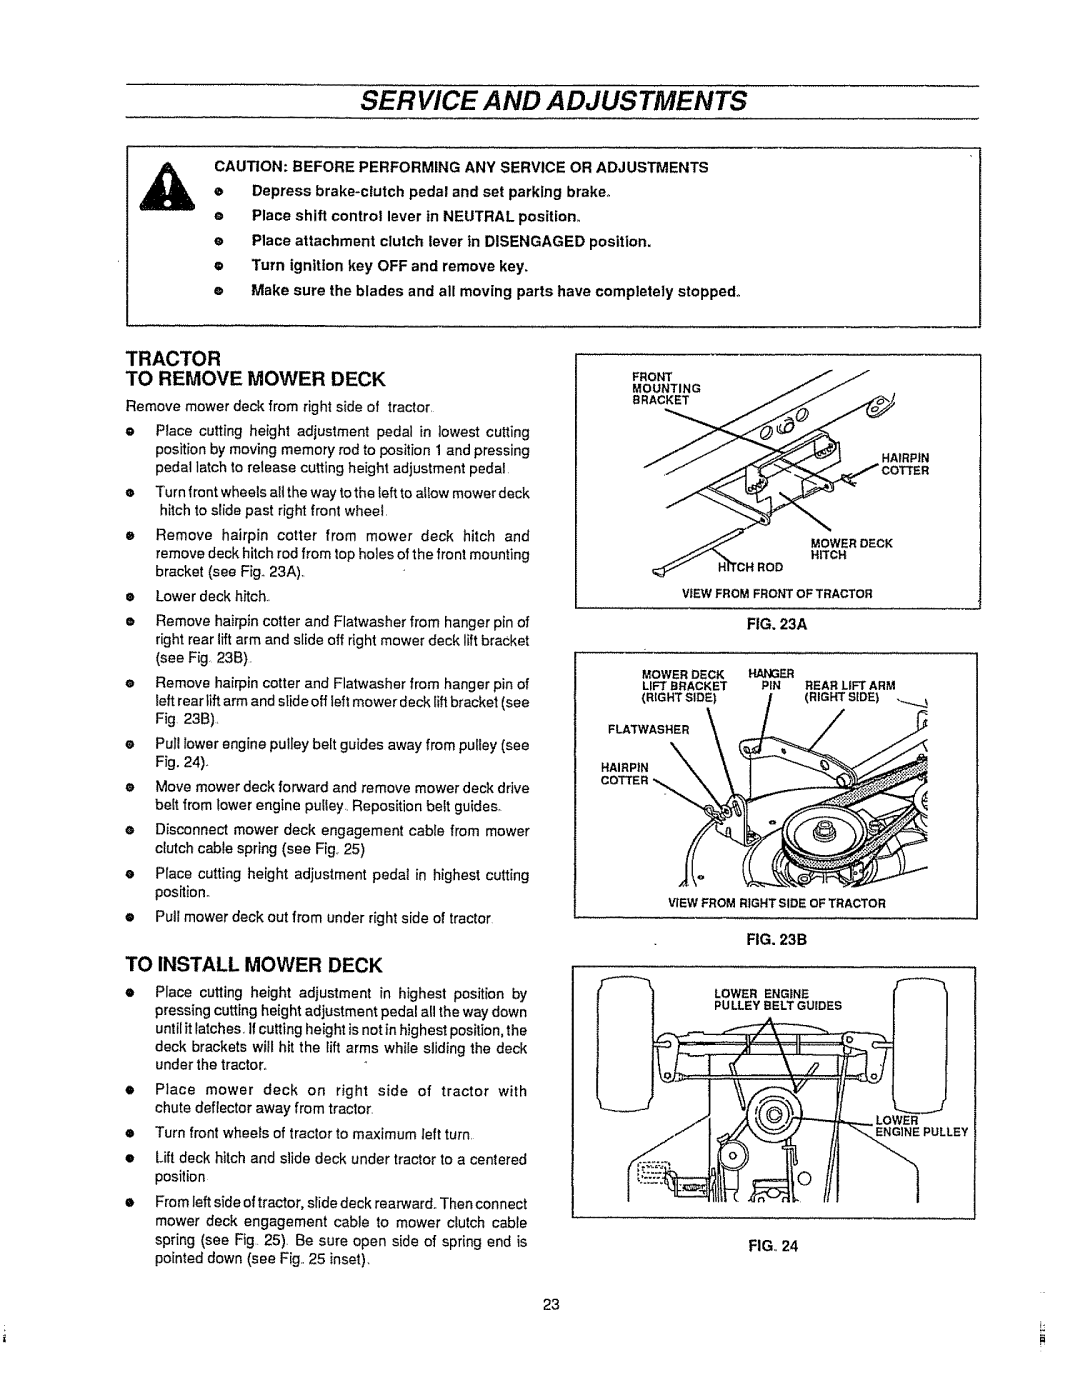 Sears 536.25587 owner manual Service And Adjustments, Tractor To Remove Mower Deck, To Install Mower Deck 